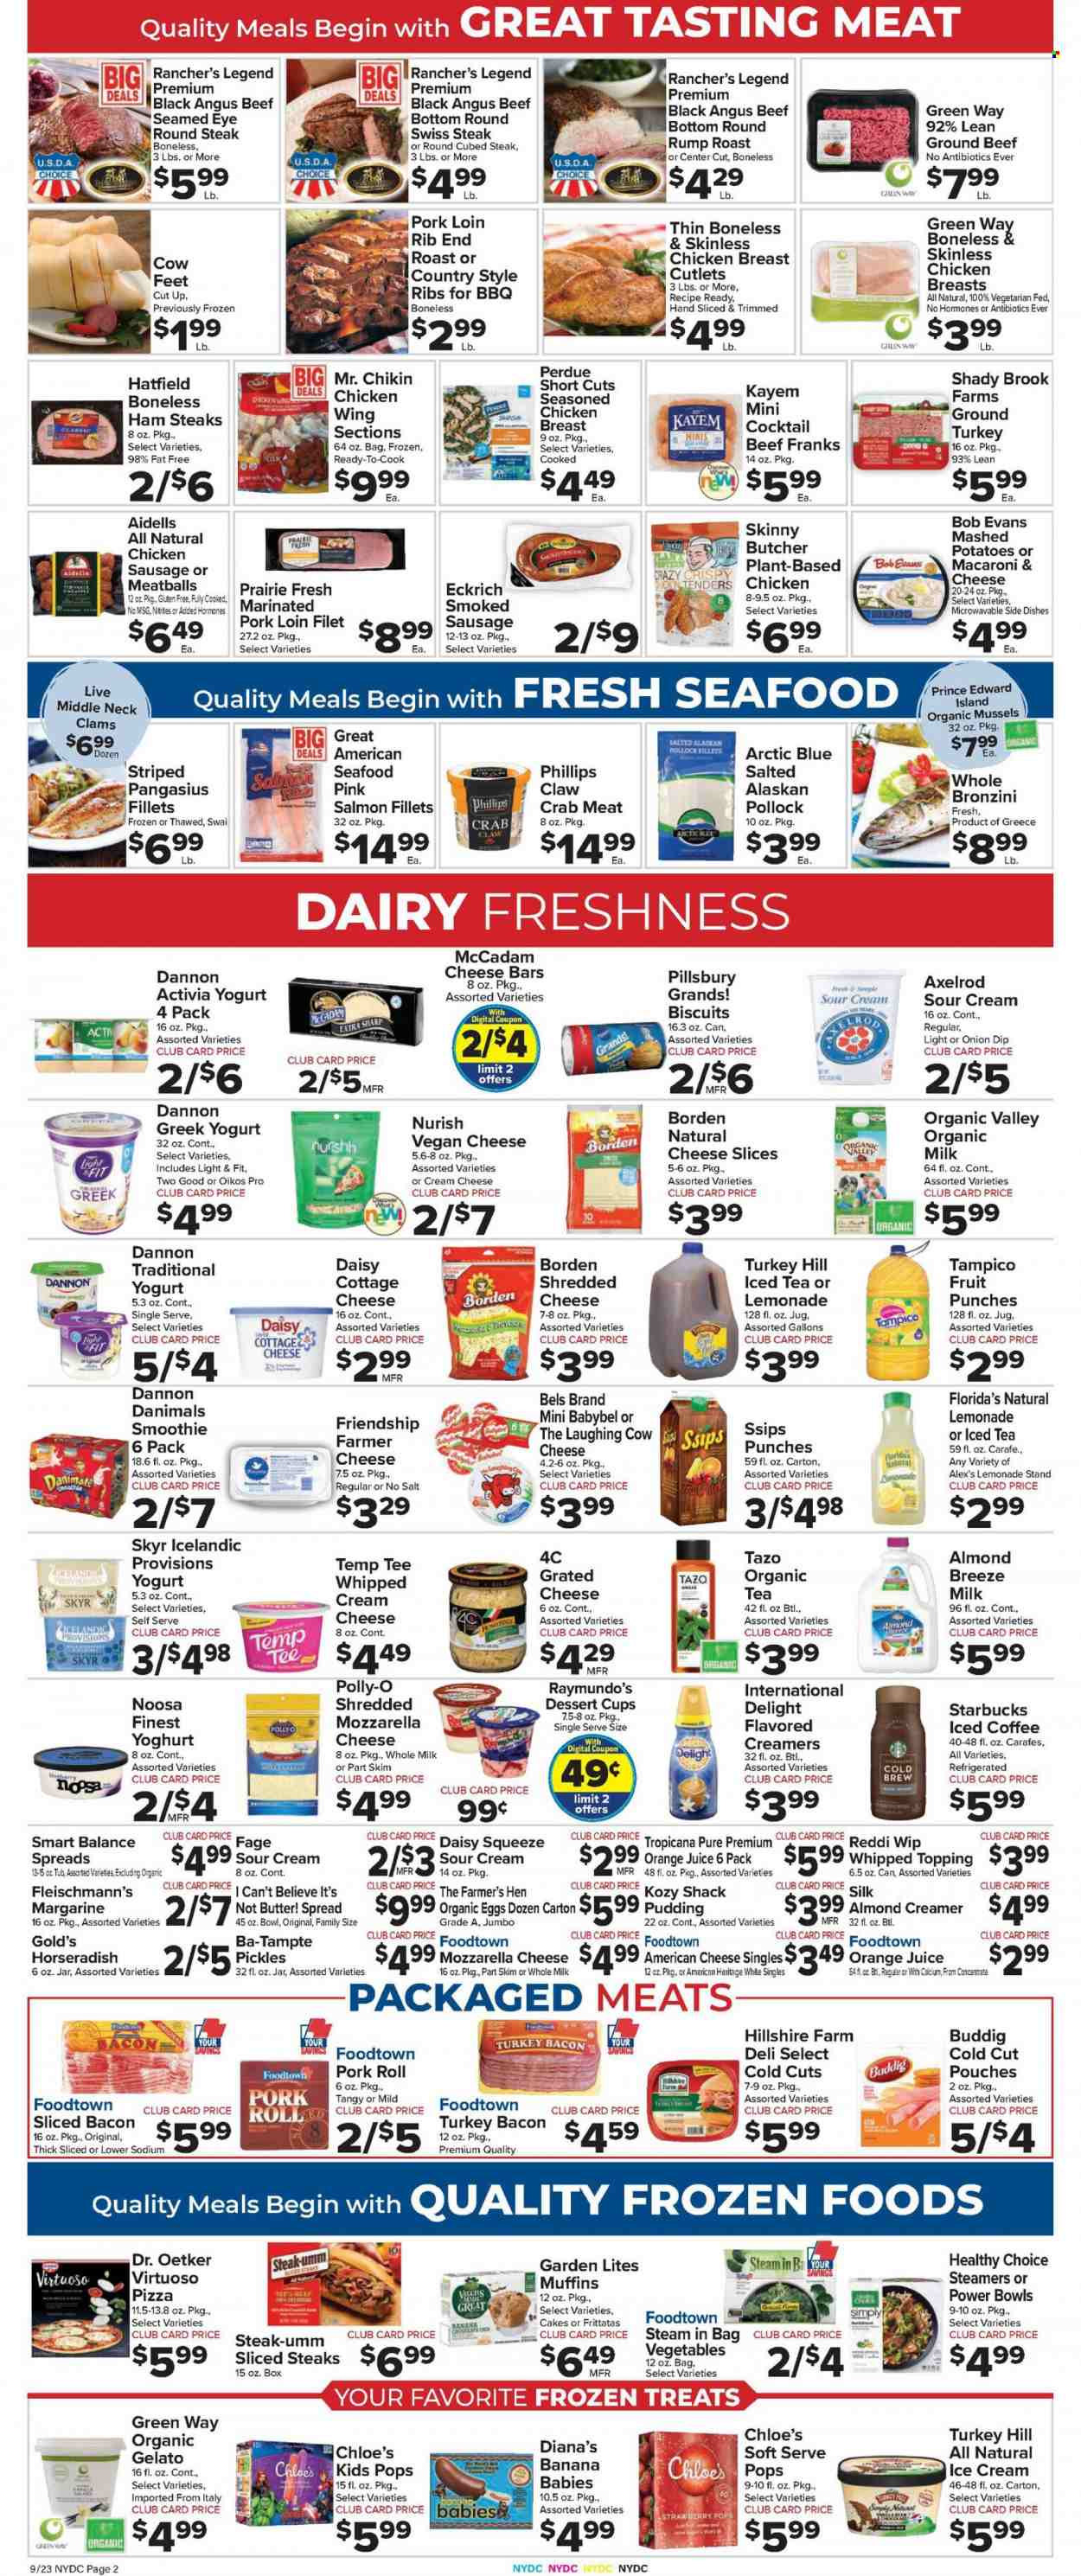 thumbnail - Foodtown Flyer - 09/23/2022 - 09/29/2022 - Sales products - cake, muffin, horseradish, clams, crab meat, mussels, salmon, salmon fillet, pollock, pangasius, seafood, crab, mashed potatoes, pizza, meatballs, Pillsbury, Healthy Choice, Perdue®, Bob Evans, bacon, turkey bacon, ham, Hillshire Farm, sausage, smoked sausage, chicken sausage, ham steaks, american cheese, cottage cheese, farmer cheese, shredded cheese, sliced cheese, The Laughing Cow, Dr. Oetker, grated cheese, Babybel, greek yoghurt, pudding, yoghurt, Activia, Oikos, Dannon, Danimals, organic milk, Silk, Almond Breeze, eggs, butter, margarine, I Can't Believe It's Not Butter, sour cream, whipped cream, creamer, almond creamer, ice cream, gelato, biscuit, Florida's Natural, topping, pickles, lemonade, orange juice, juice, ice tea, fruit punch, smoothie, iced coffee, Starbucks, ground turkey, chicken breasts, beef meat, ground beef, steak, round steak, pork loin, pork meat, pork ribs, marinated pork, country style ribs, Chloé, fork, cup, bowl, calcium. Page 4.